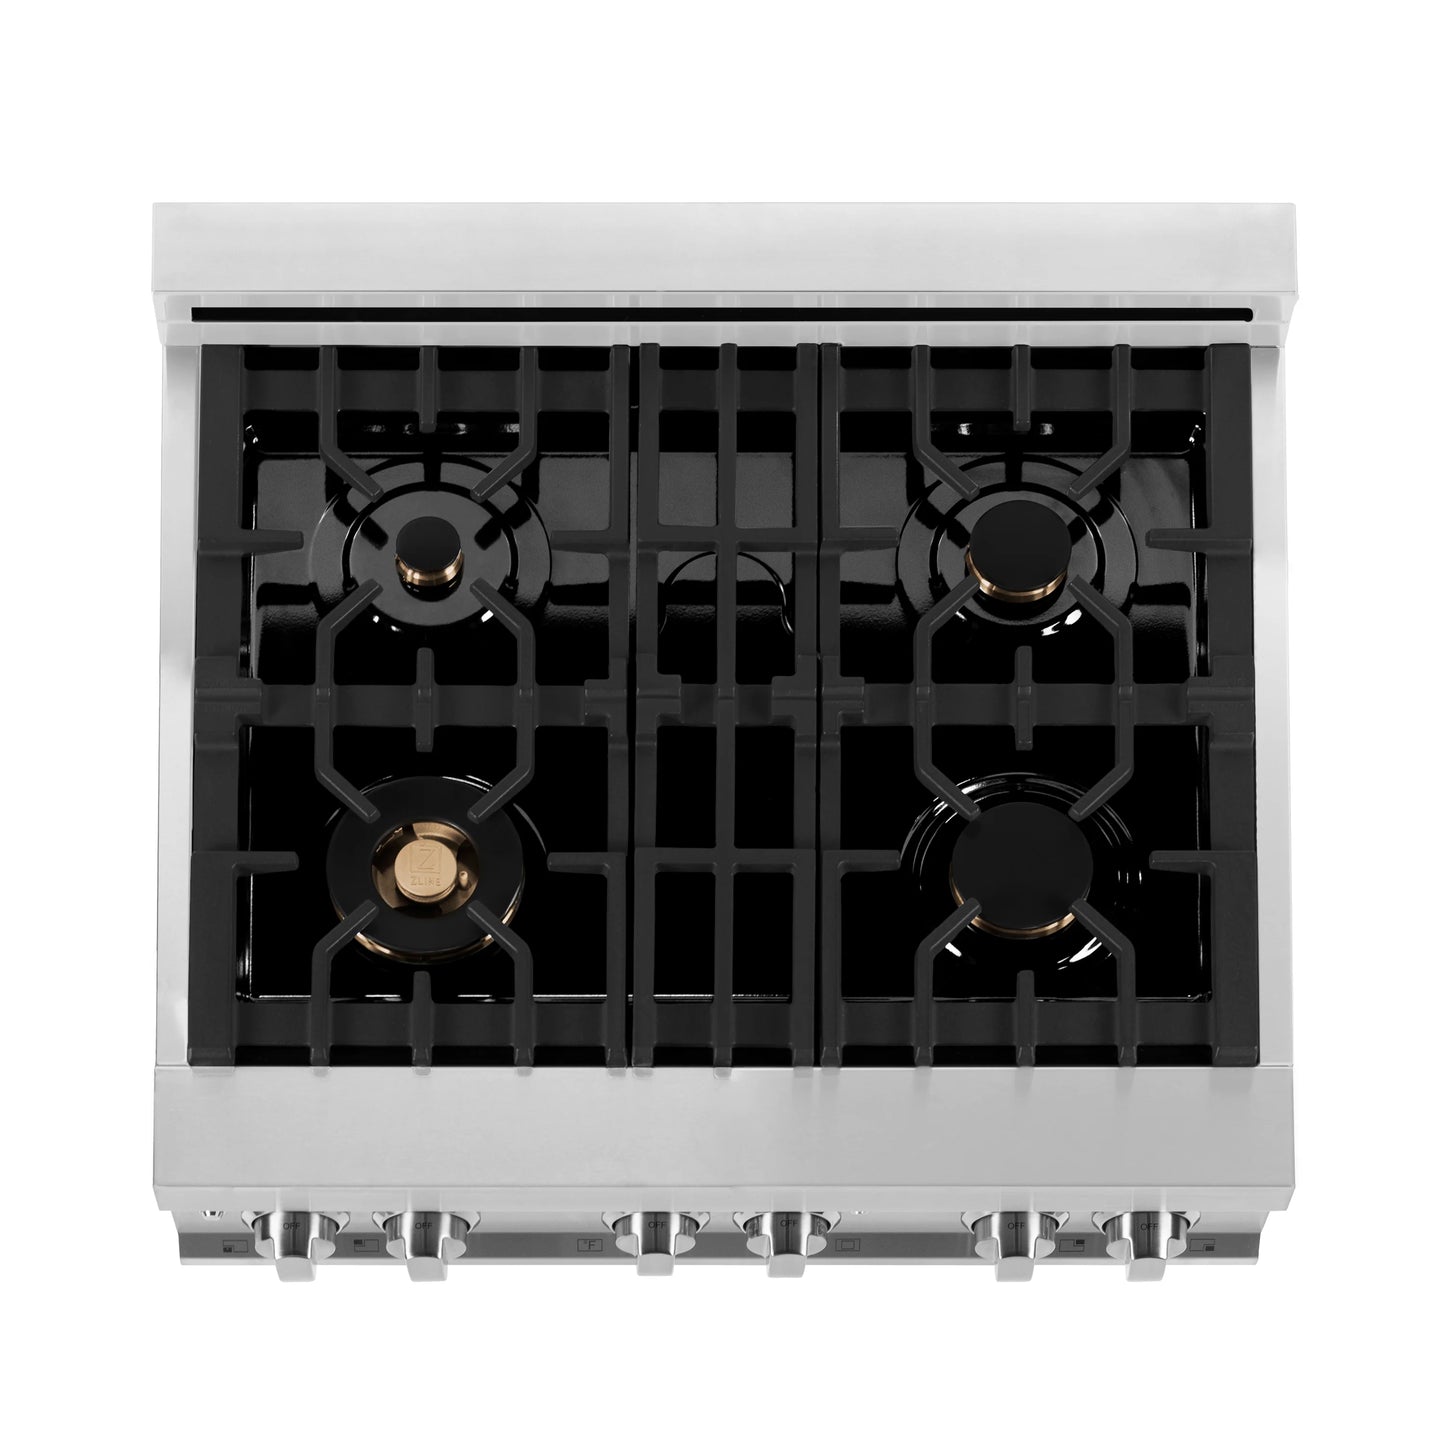 ZLINE 30 in. Dual Fuel Range with Gas Stove and Electric Oven in Stainless Steel and Brass Burners (RA-BR-30)